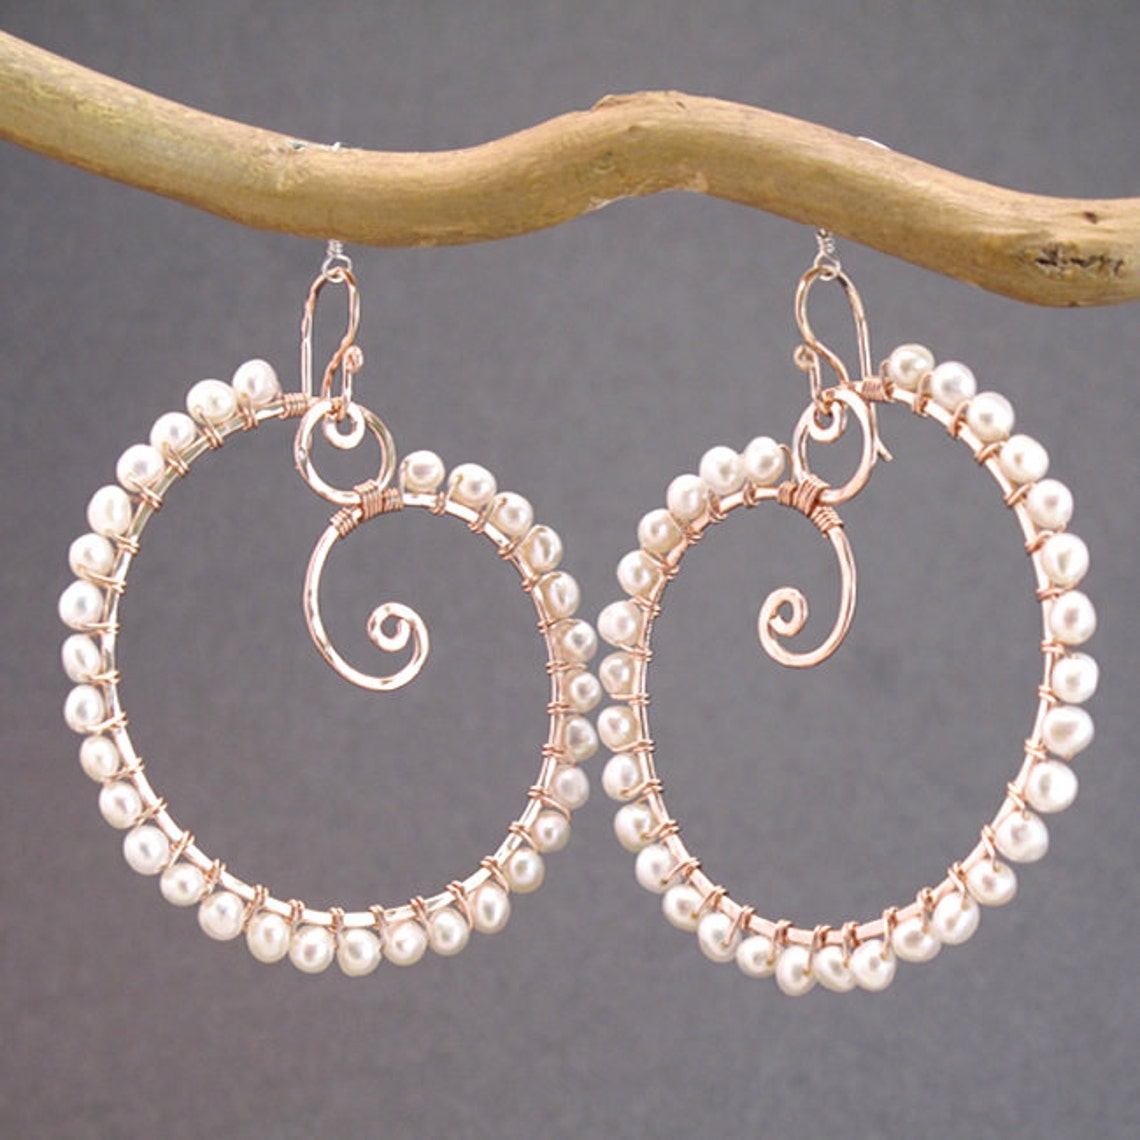 Hammered Swirl Hoops With Ivory Pearls Cosmopolitan 85 - Etsy